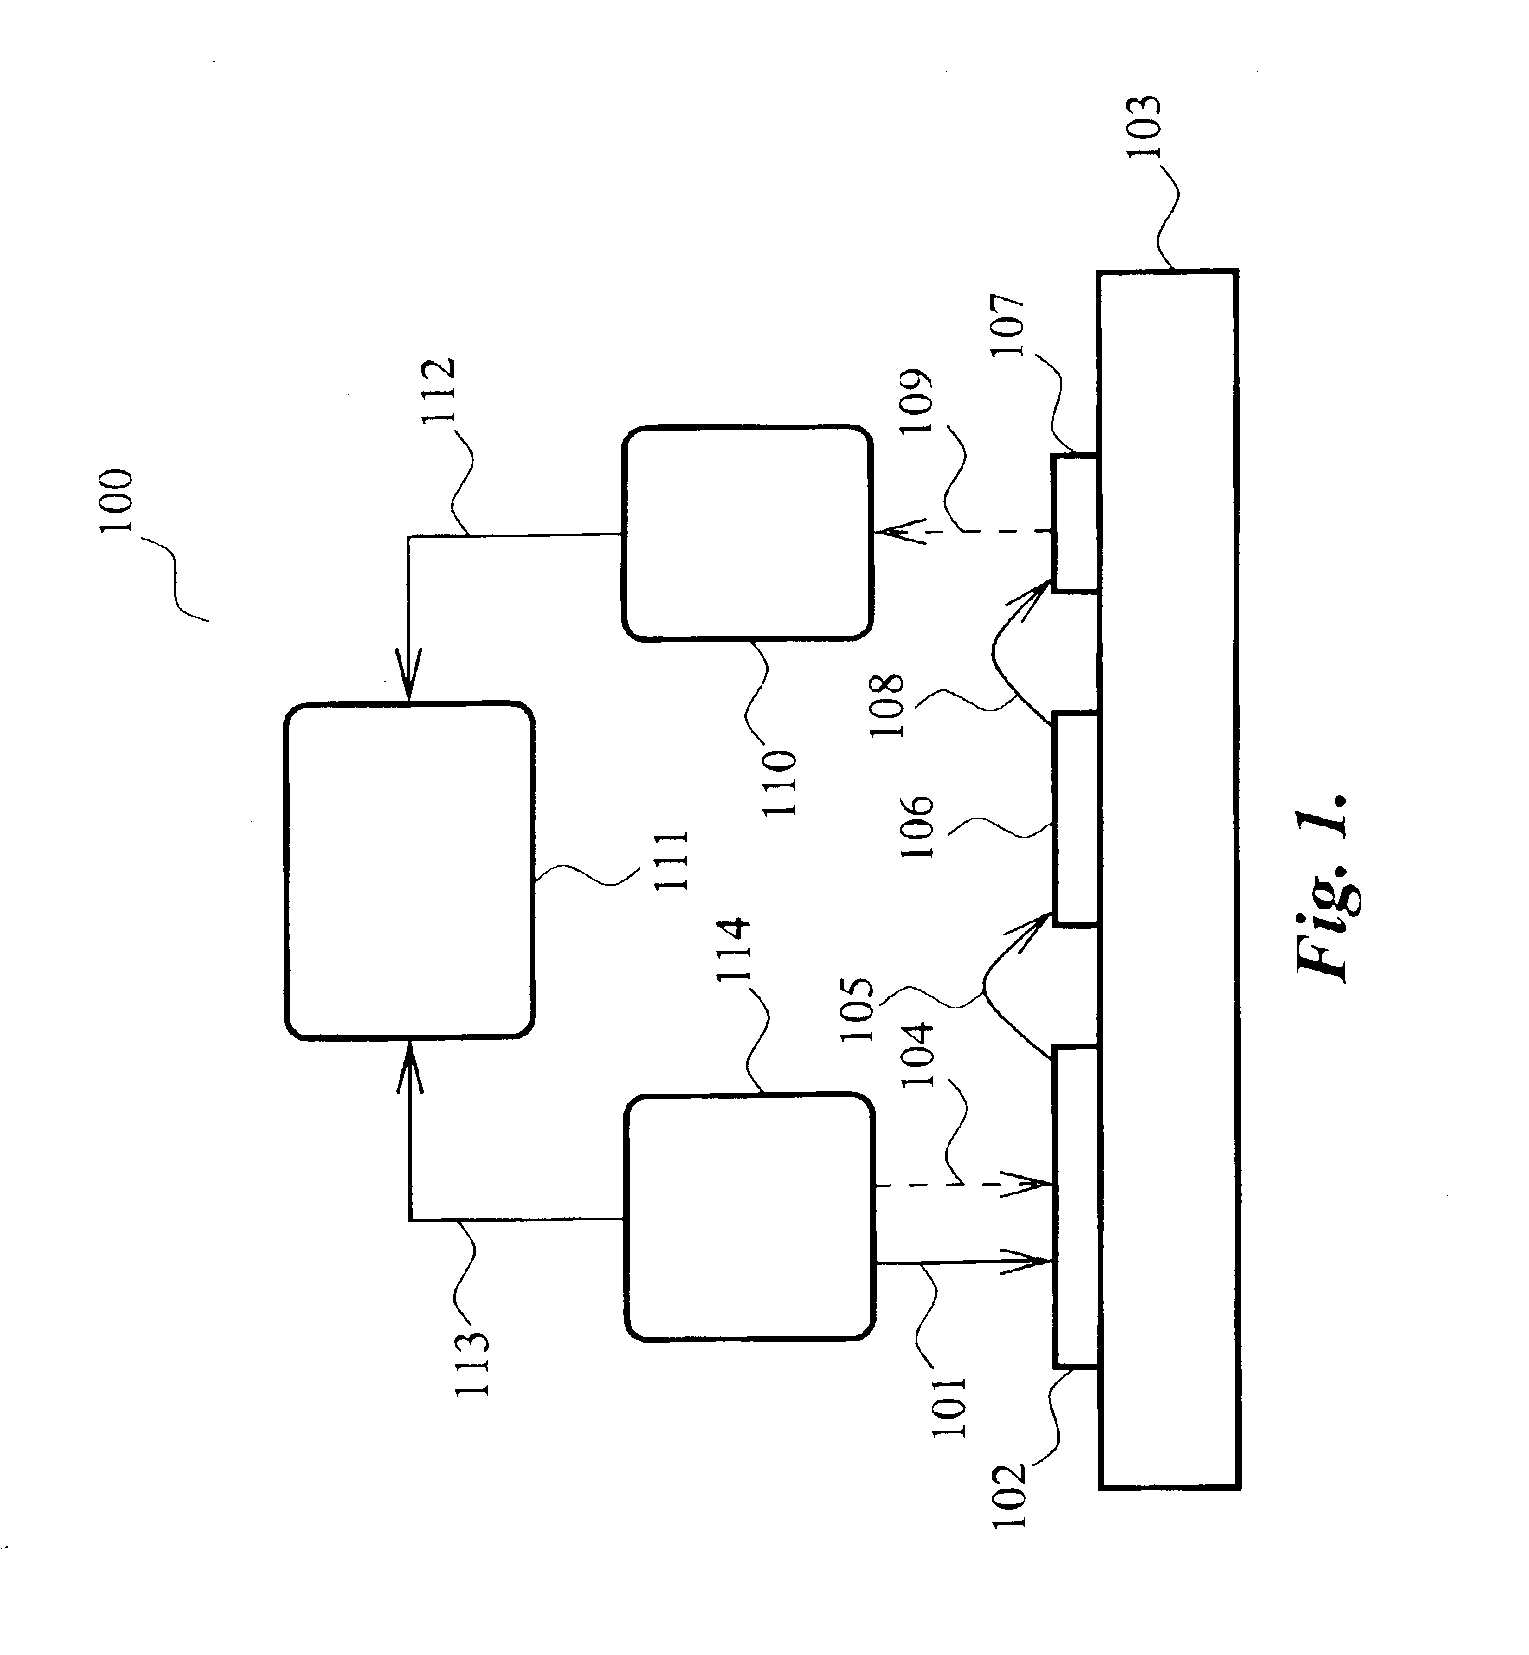 Apparatus and method for measuring characteristics of dynamic electrical signals in integrated circuits